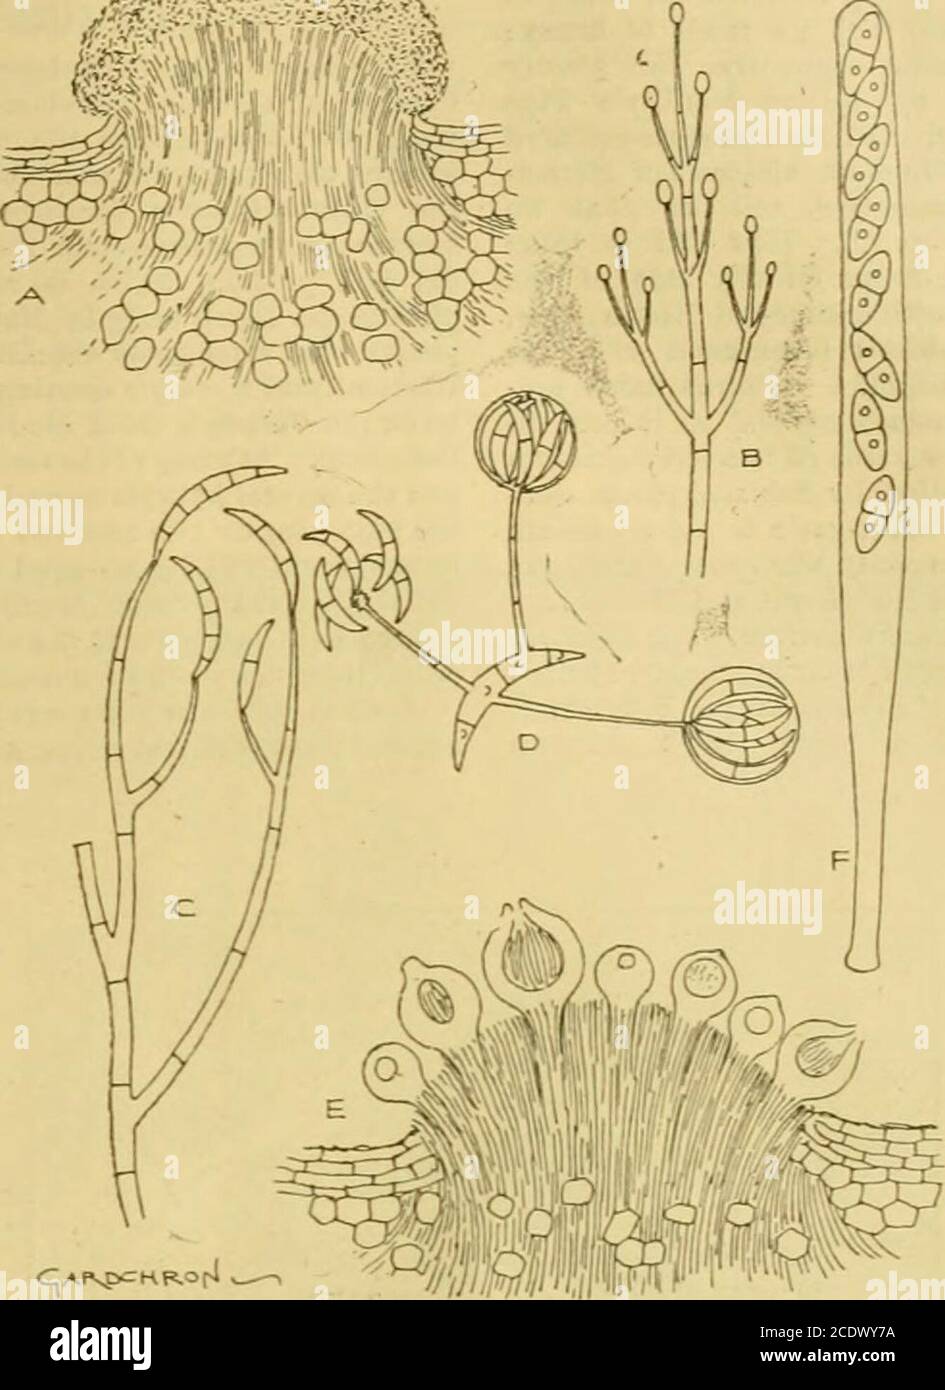 . The Gardeners' chronicle : a weekly illustrated journal of horticulture and allied subjects . gyne vemuta, Bolfe (n sp.).— Pseudo bulbs aboutan inch distant on the rhizome, elliptical-oblong,obscurely tetragonal, sulcate, 2 inches long by ^ inchttroad, diphyllou9. Leaves lanceolate, acuminate,coriaceous, three-nerved, shining above about 7 incheslong by 1 inch broad, narrowed at the base into a shortpetiole. Scape pendulous, about 10 inches long, many-flowered. Bracts persistent, broadly elliptical, obtuse,convolute, 7 liDes long. Pedicels 6-7 lines long.Sepals ovate-oblong, apicutate, conca Stock Photo